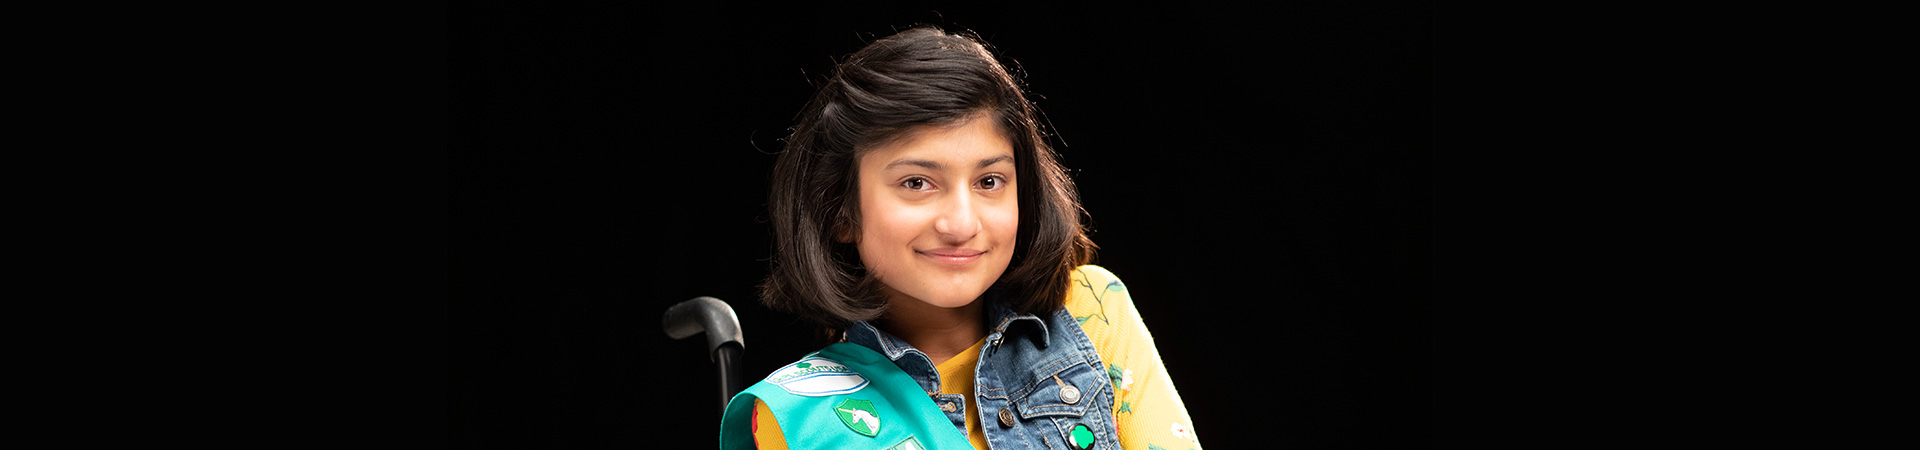  High school girl in Girl Scout sash and winter jacket smiling at camera against green backdrop. 